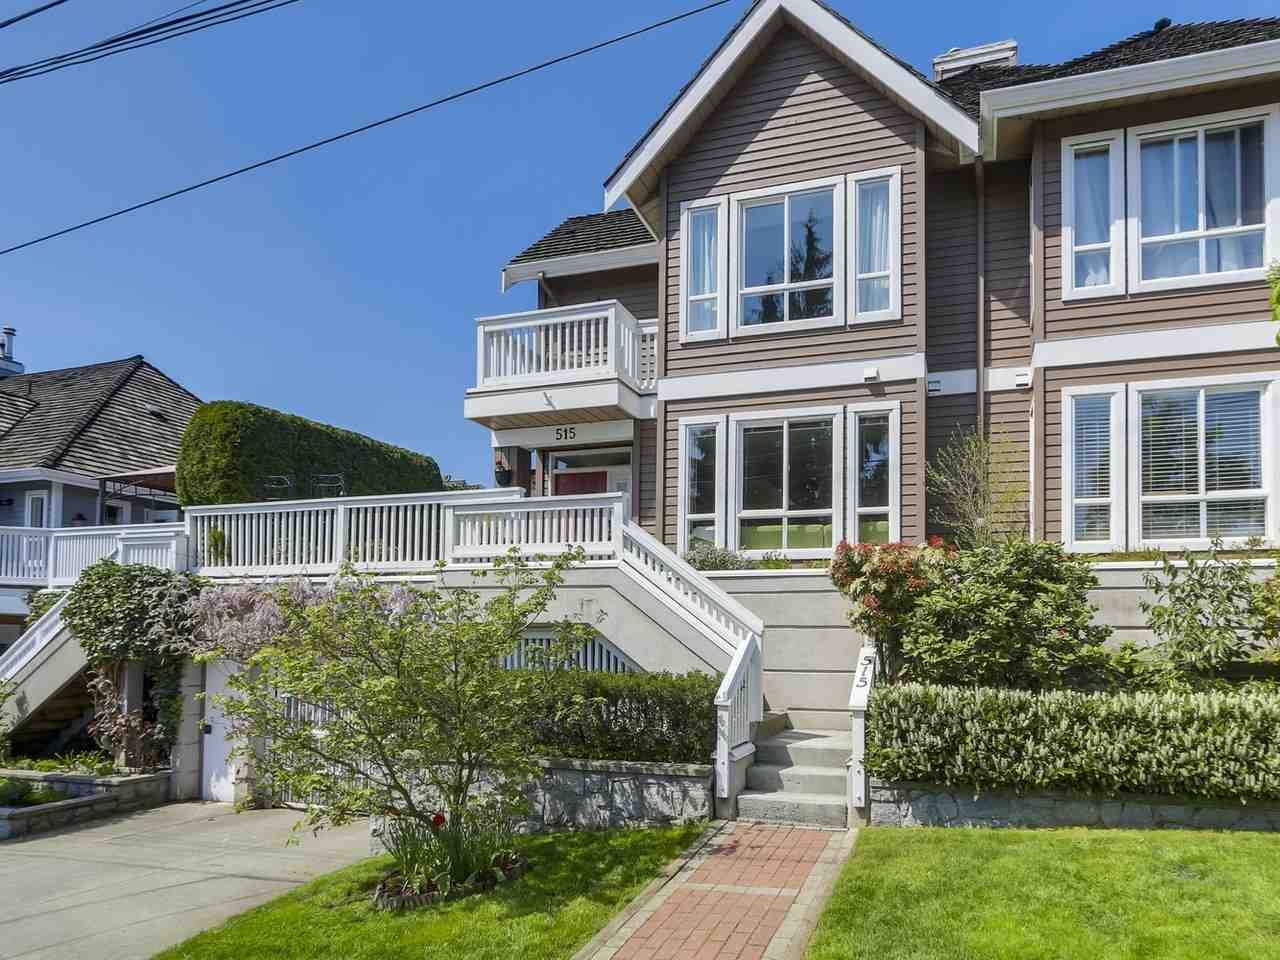 Main Photo: 515 ST. ANDREWS AVENUE in : Lower Lonsdale Townhouse for sale : MLS®# R2265681